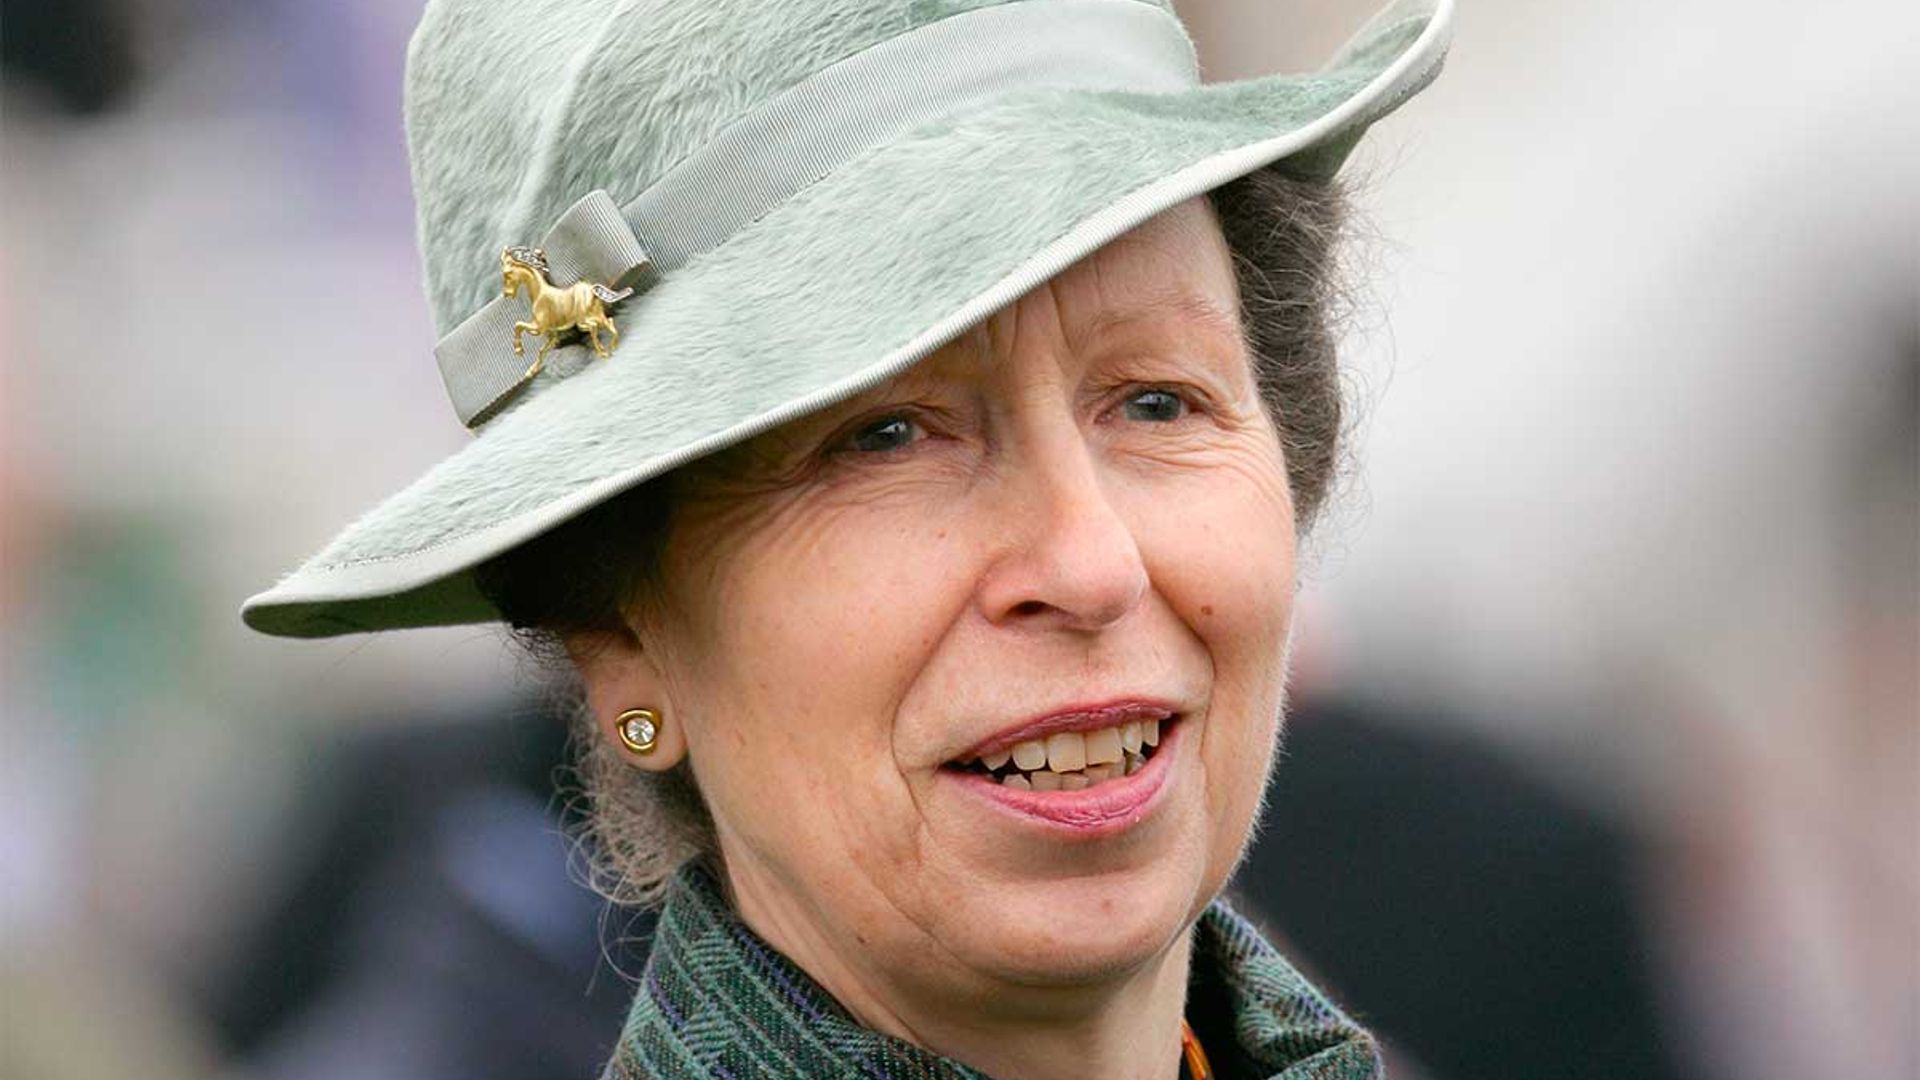 Princess Anne pays tribute to midwives for their care and compassion in emotional video